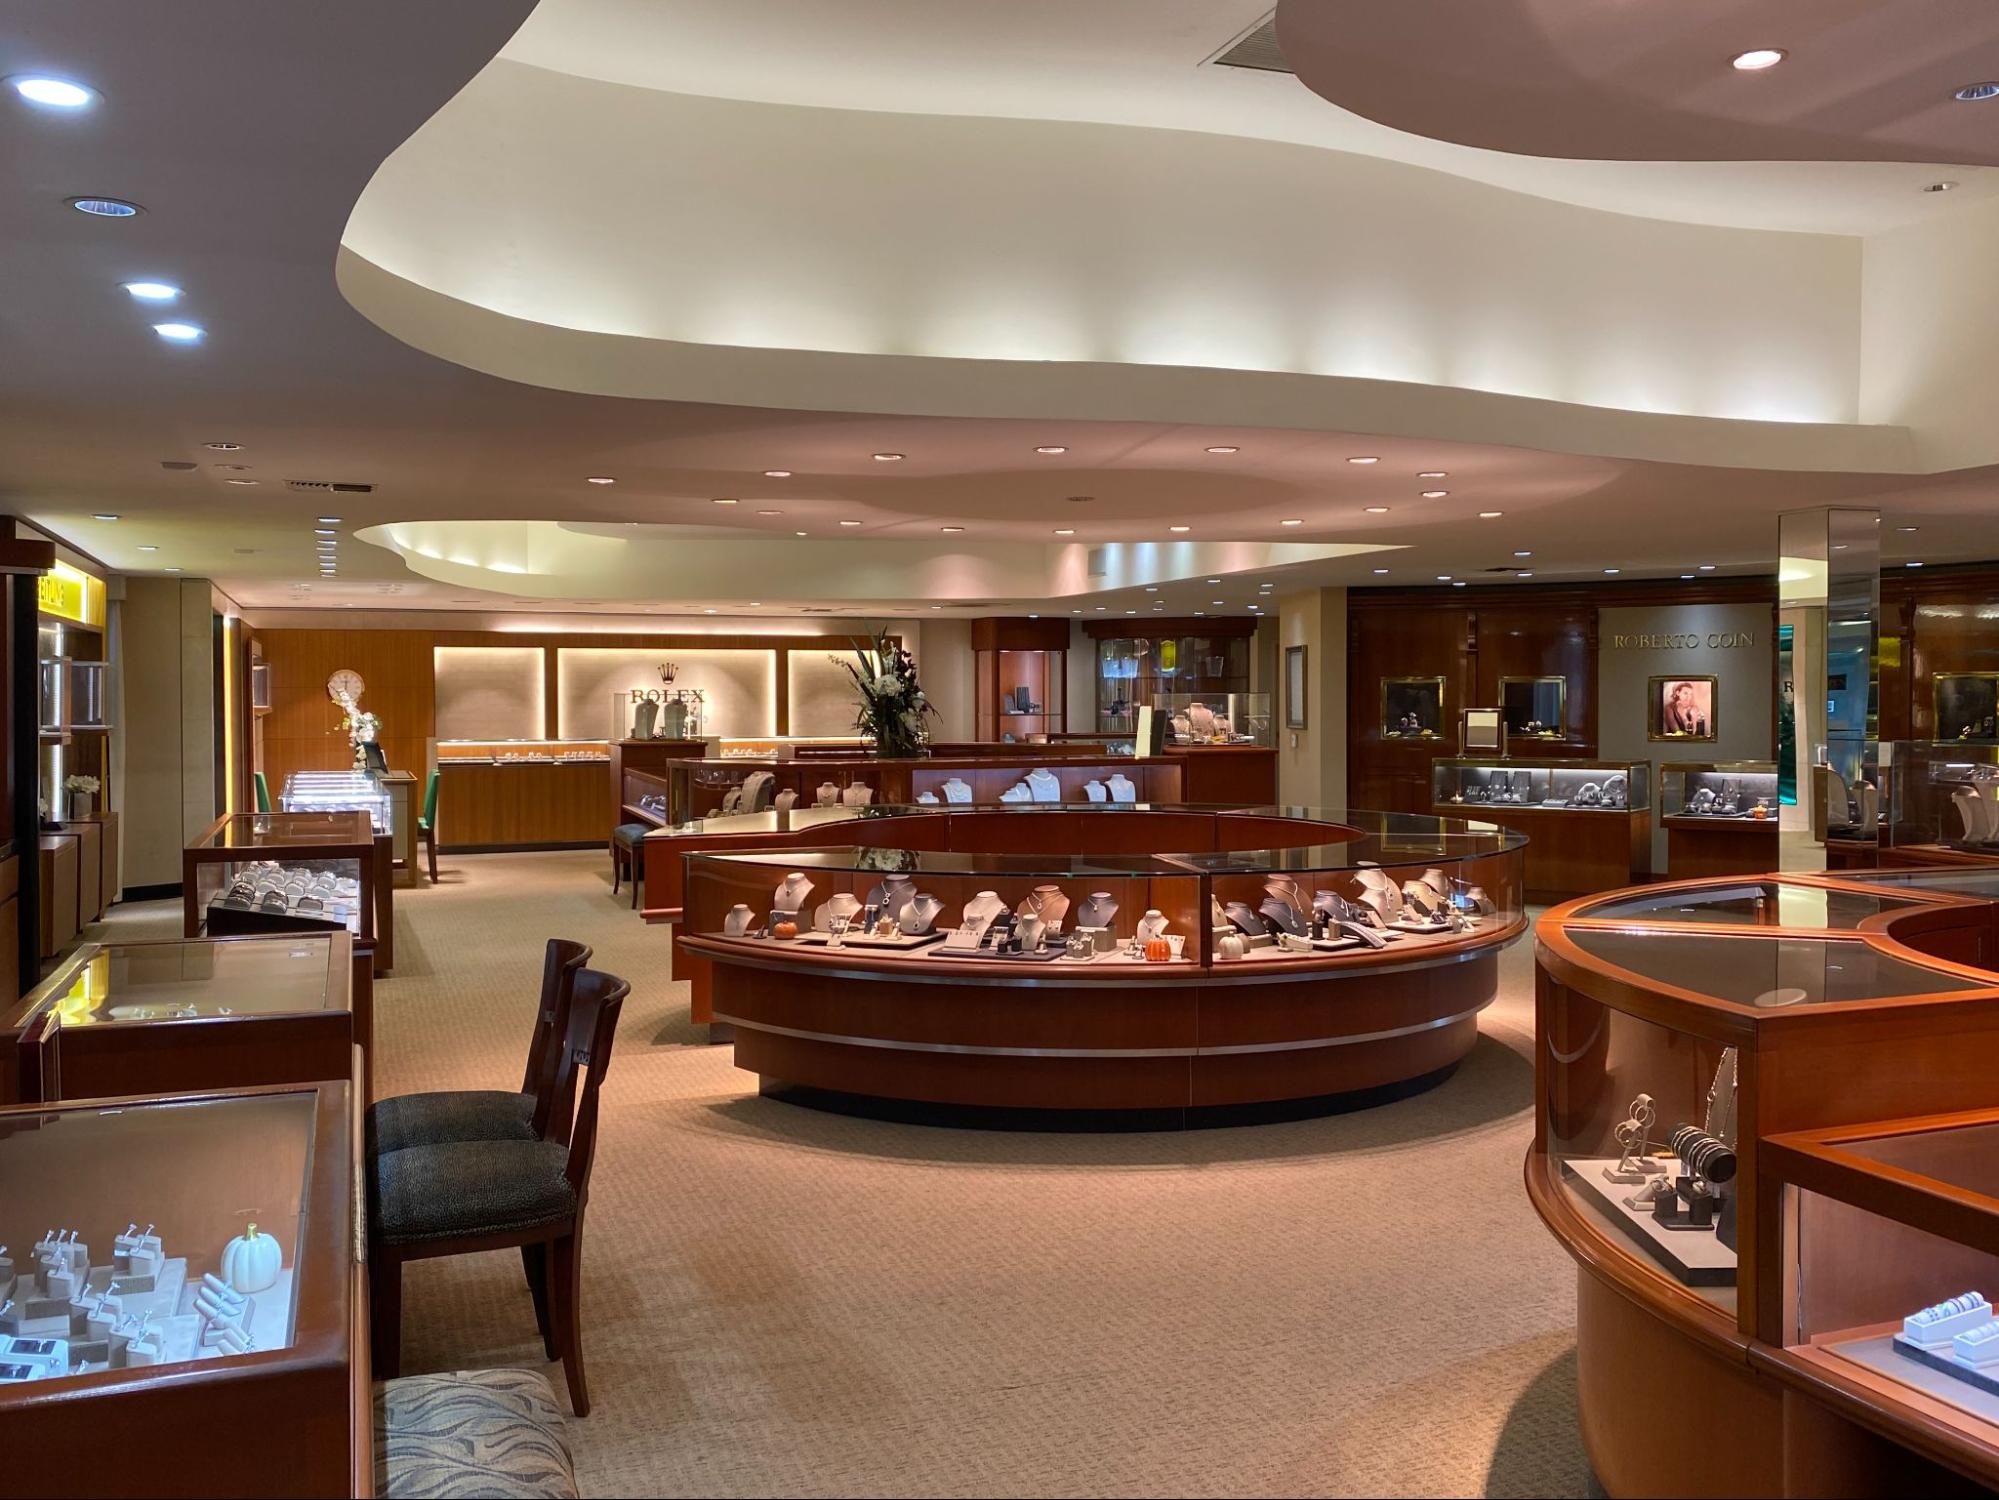 Meet Morgan’s Jewelers: The South Bay’s most trusted jeweler for over 77 years